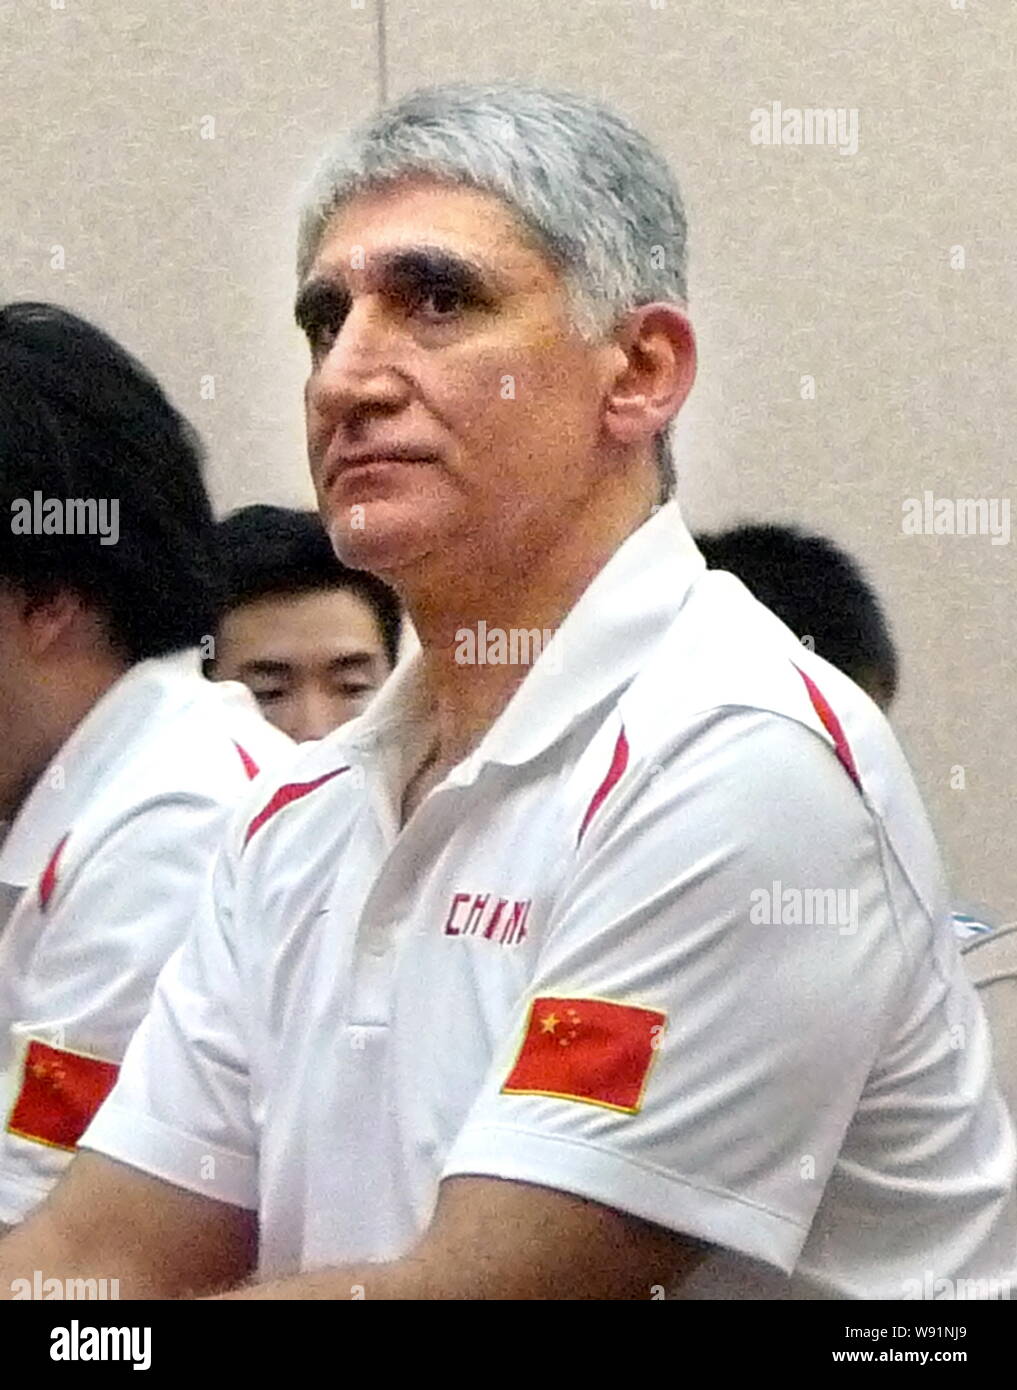 Panagiotis Giannakis,the new head coach of the China mens basketball team, attends a press conference for the Stankovic Continental Cup 2013 in Guangz Stock Photo